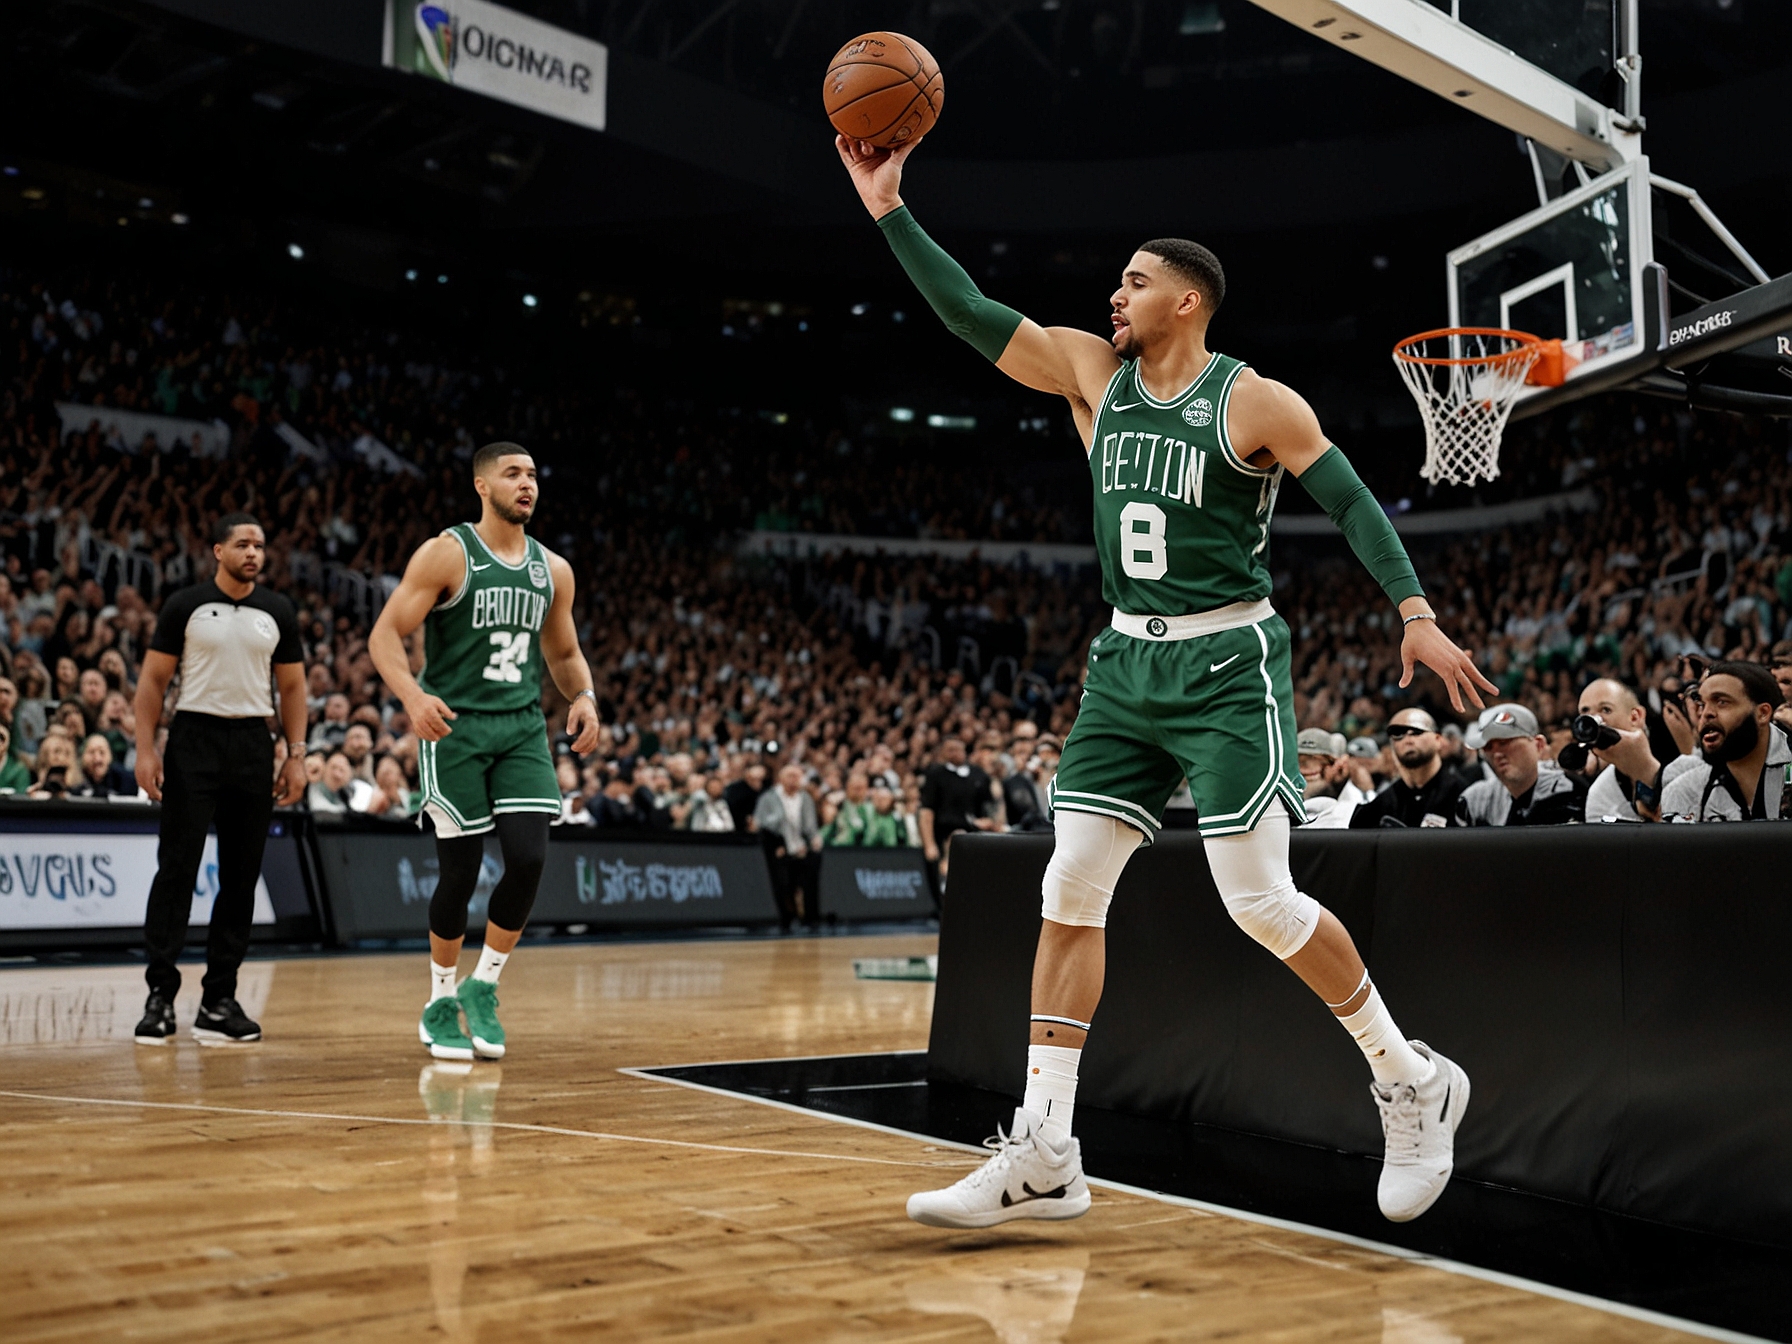 The final moment of the decisive fifth game, with Jayson Tatum making a crucial play. Fans in the background are on their feet, encapsulating the tension and excitement of the championship win.